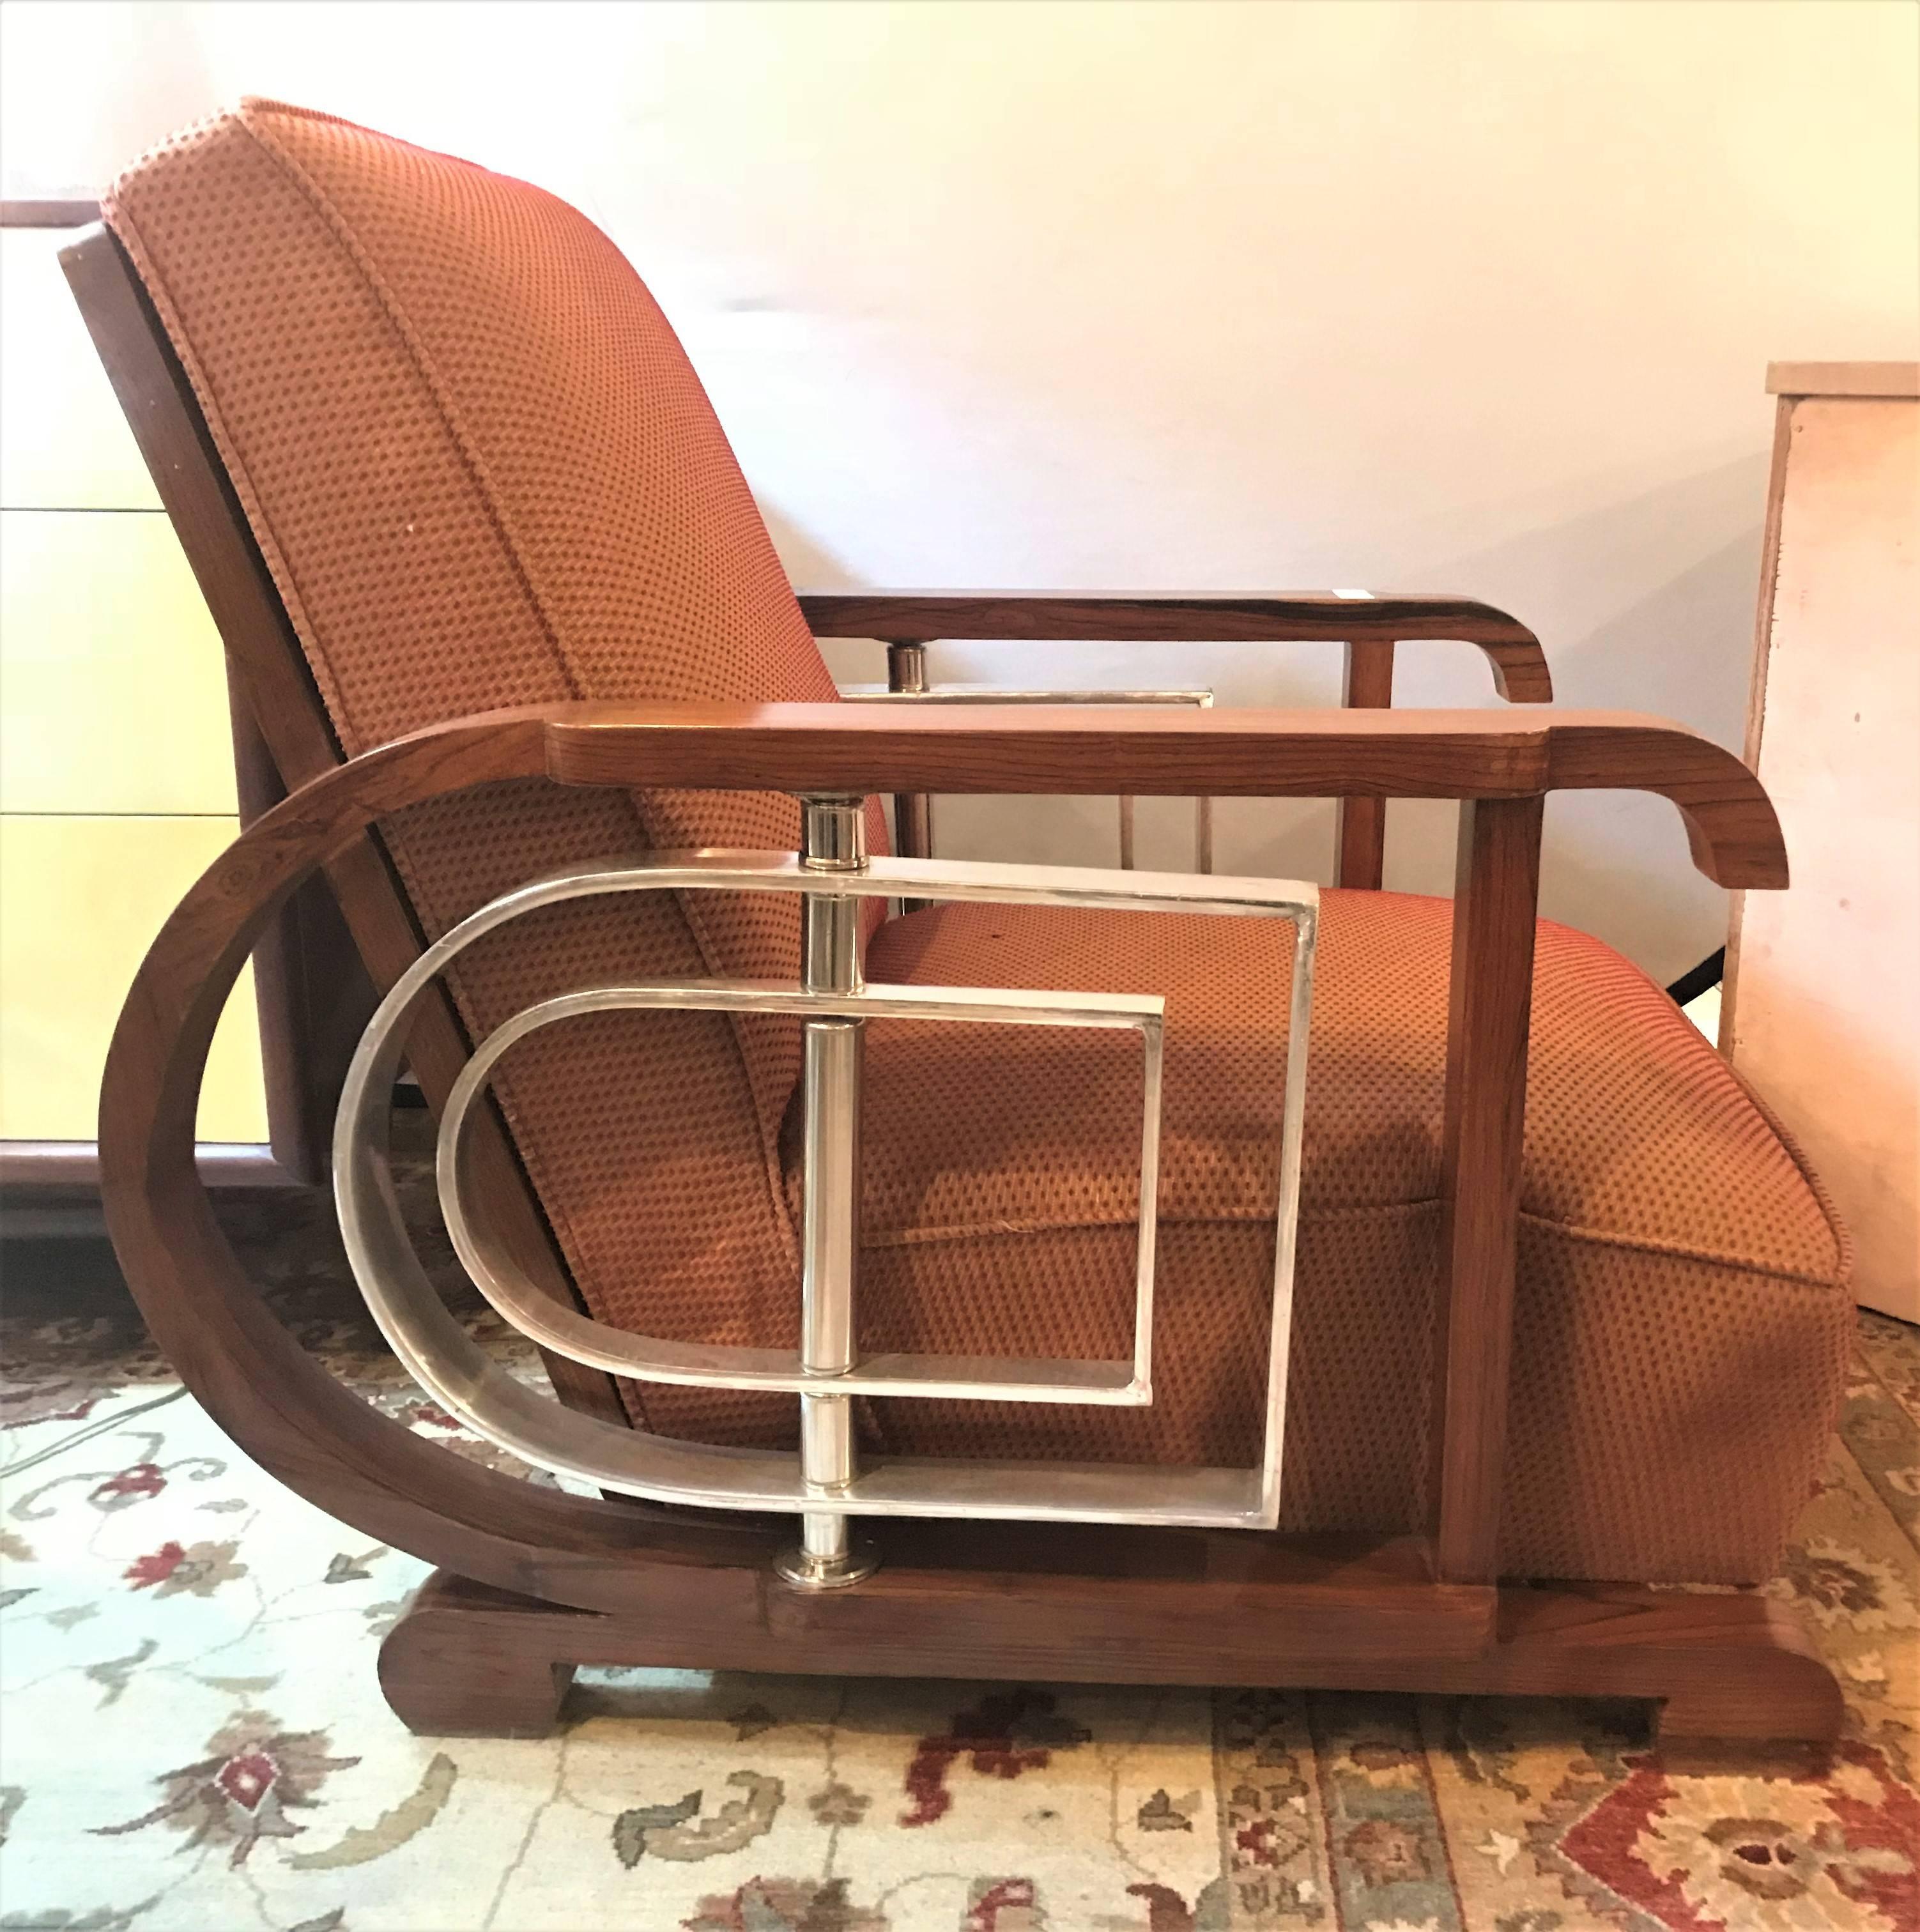 Pair of Mid-Century Modern Art Deco style lounge/ theater chairs. An outstanding set of Art Deco inspired lounge or theater chairs from the Mid-Century Modern era. Each having all new fabric with new cushions, backrest, welts and undercarriage. All